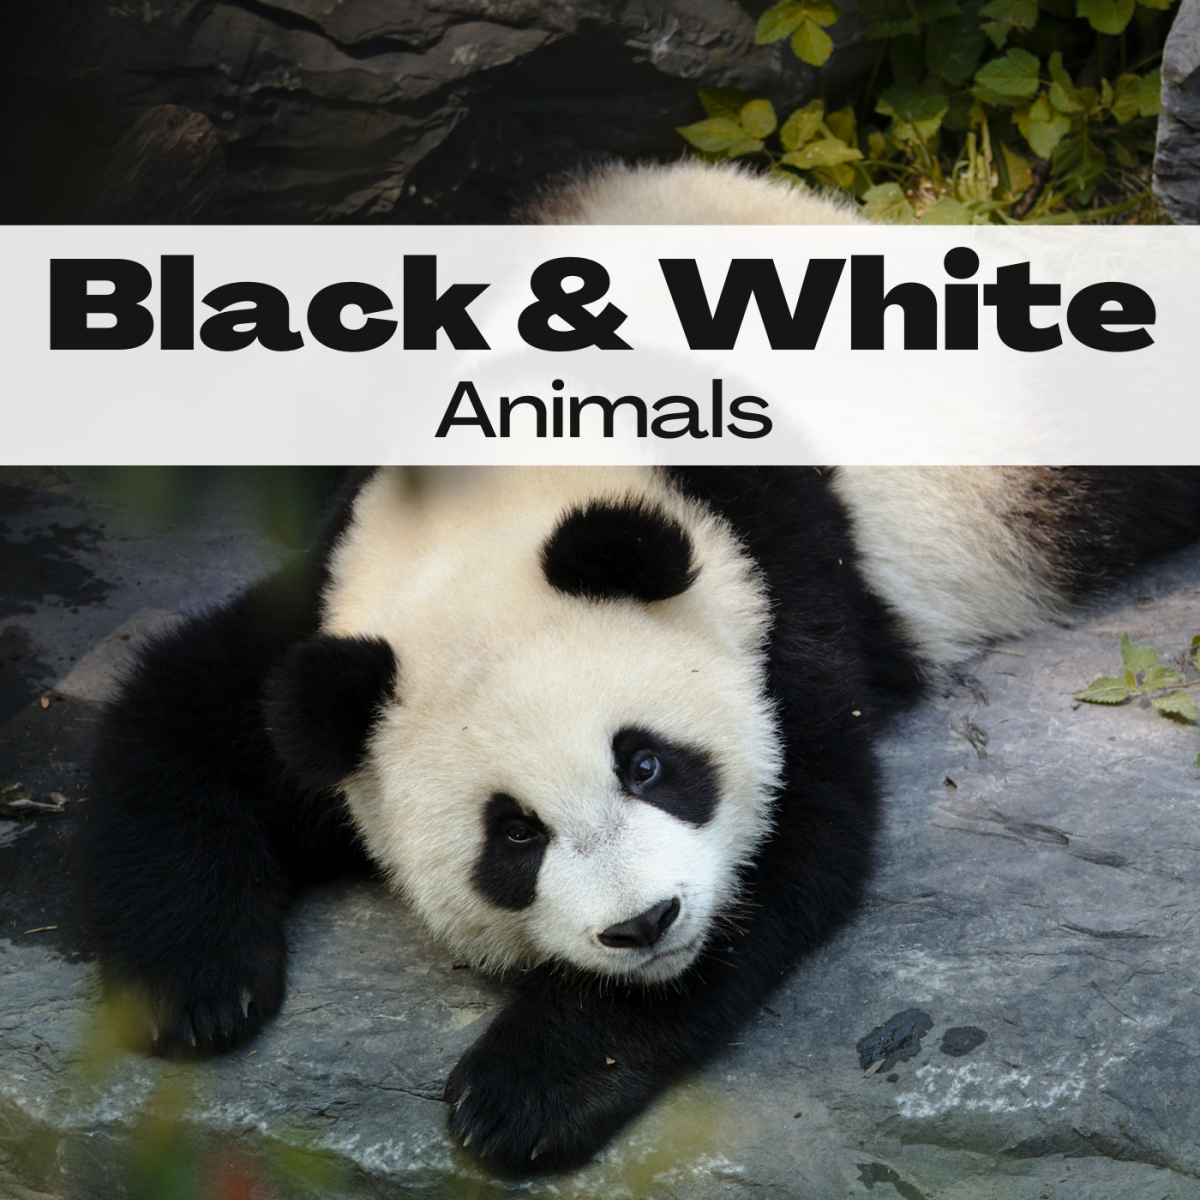 The panda is an incredibly popular black and white animal, but it's not the only one! Learn about lots of other animals that share this color scheme.